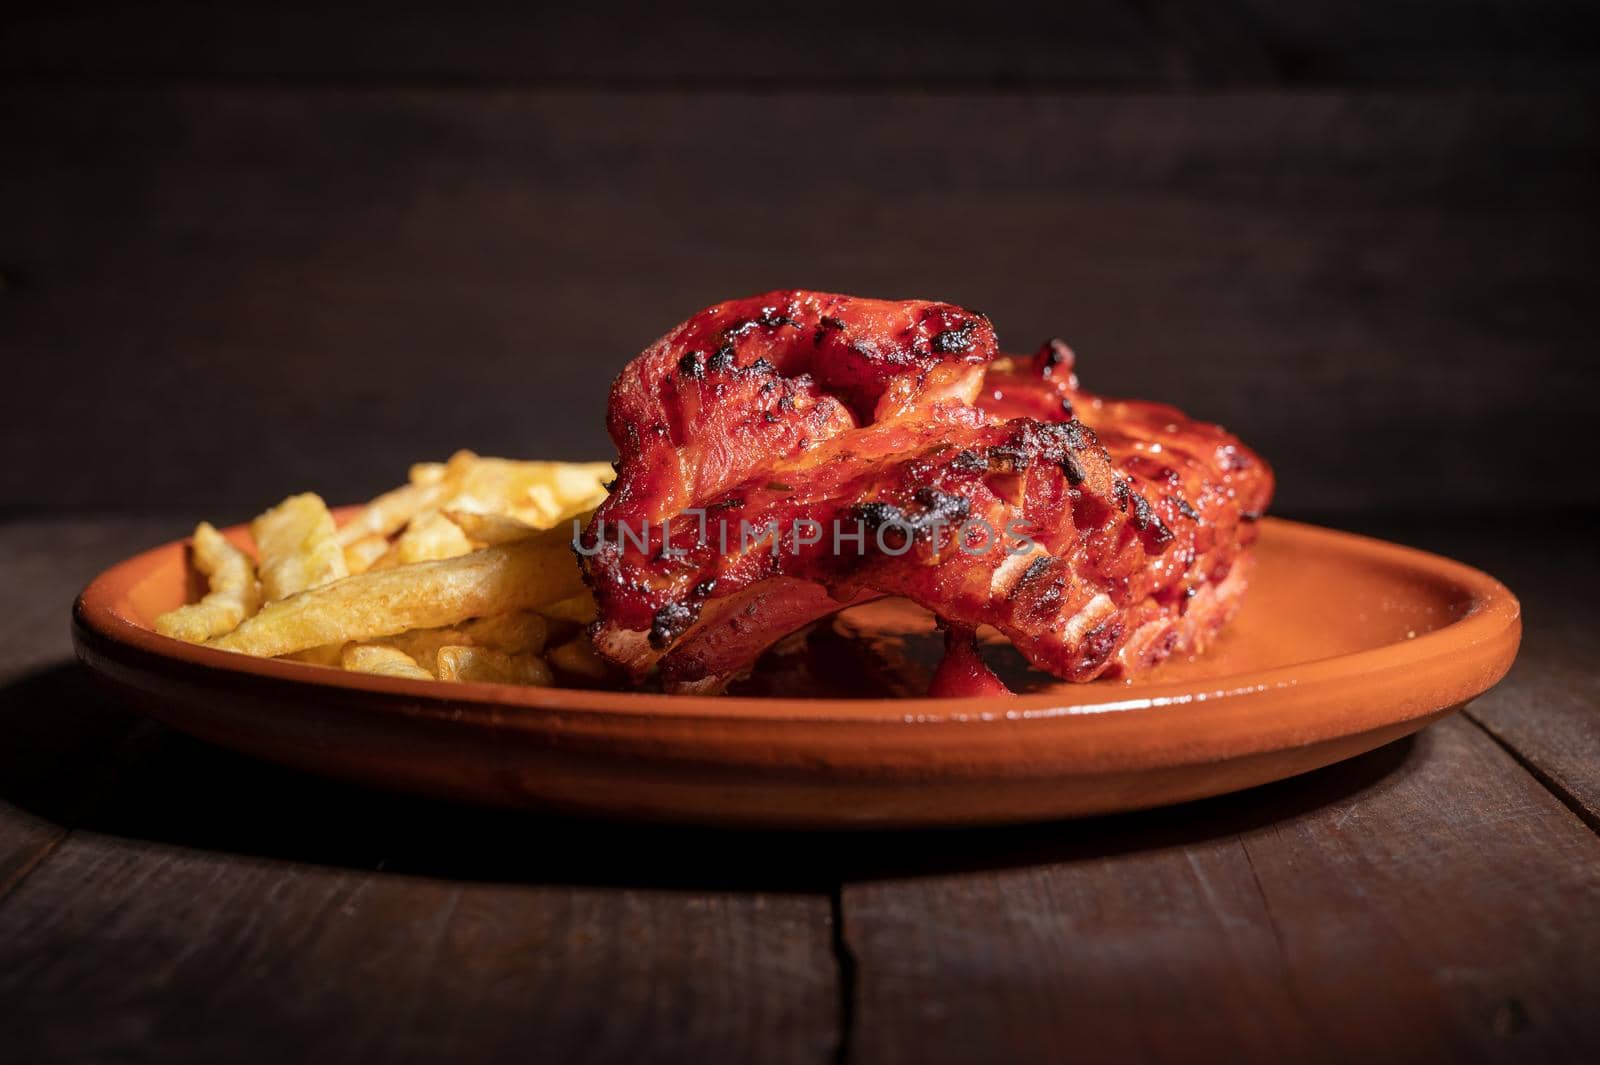 Tracking shot of delicious Grilled bbq ribs on stone plate. High quality photography.